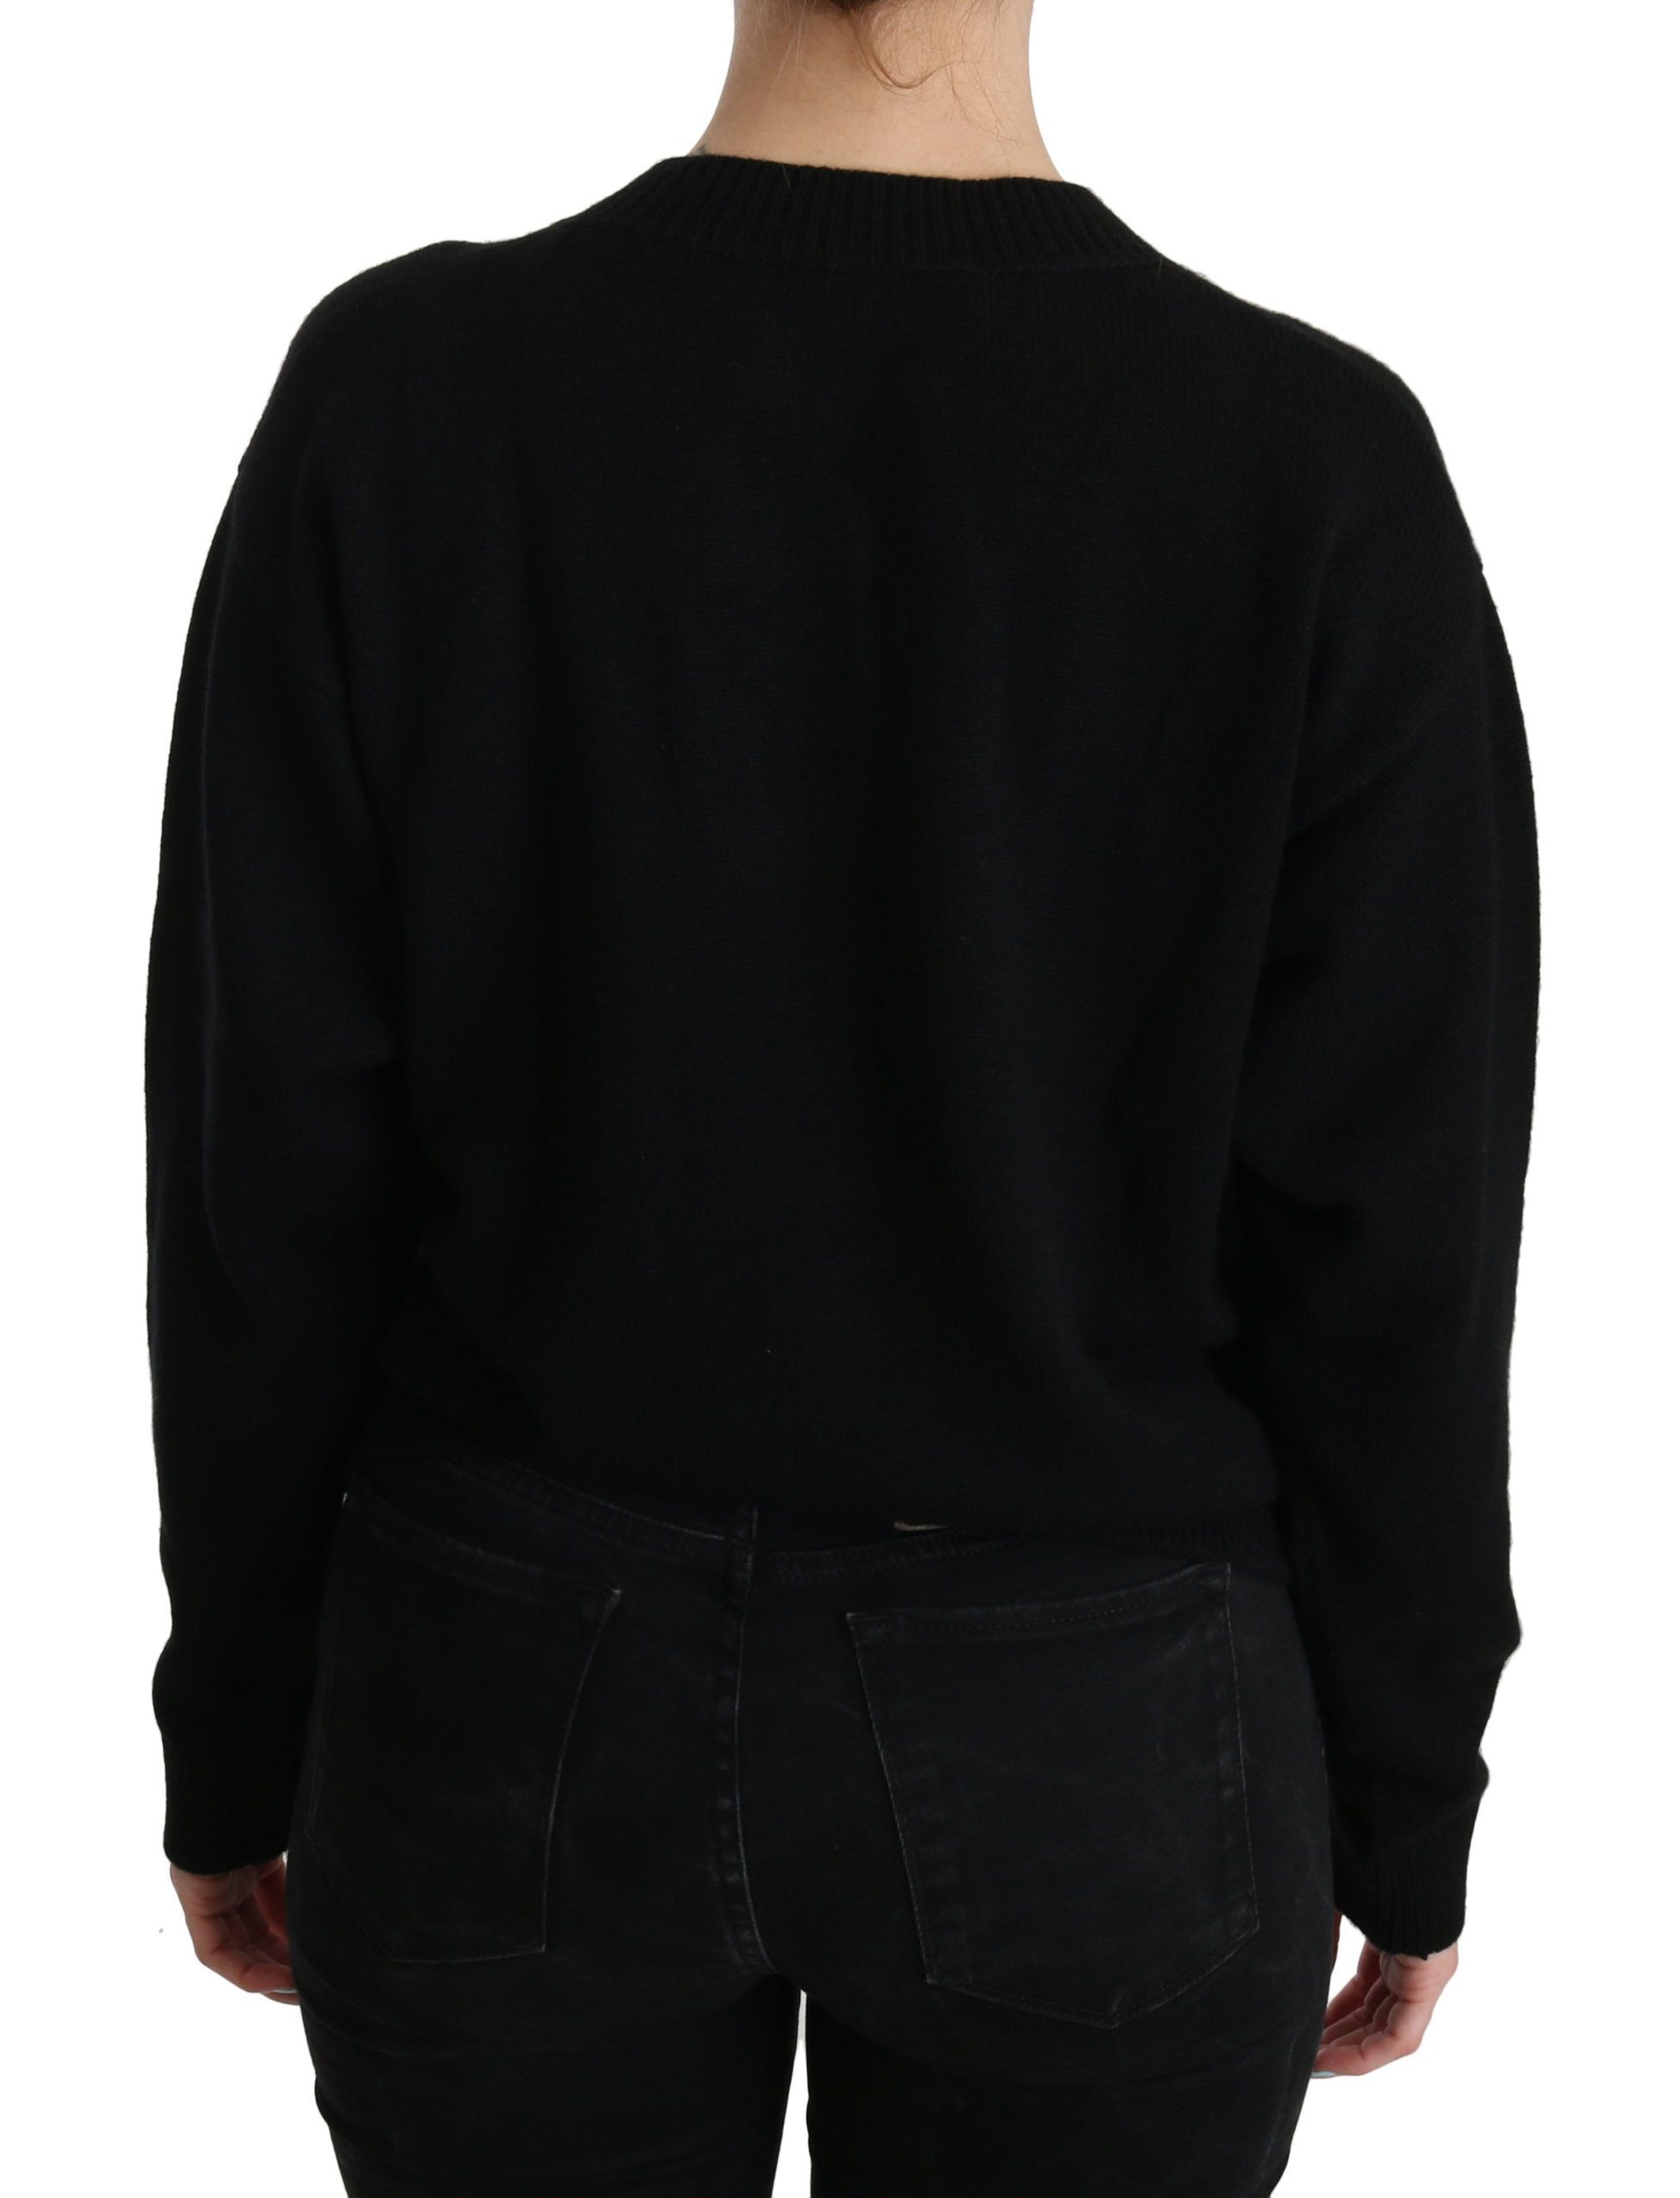 Black Button Embellished Cardigan Sweater - Designed by Dolce & Gabbana Available to Buy at a Discounted Price on Moon Behind The Hill Online Designer Discount Store